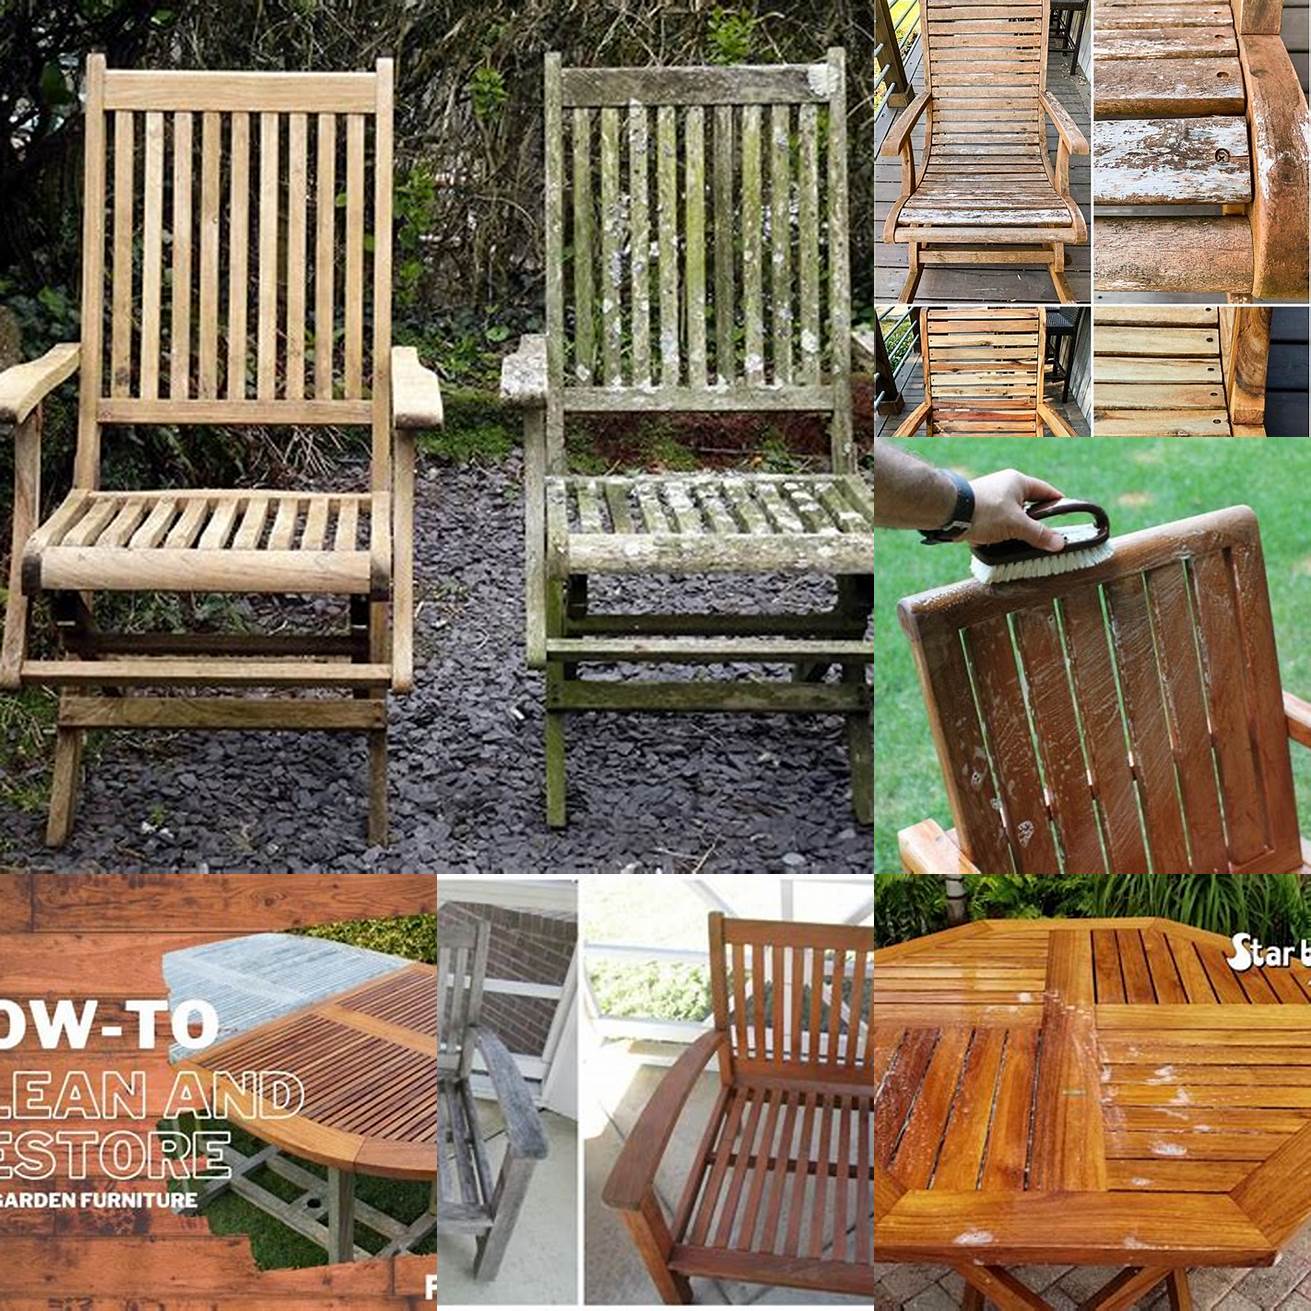 Teak outdoor furniture before and after cleaning